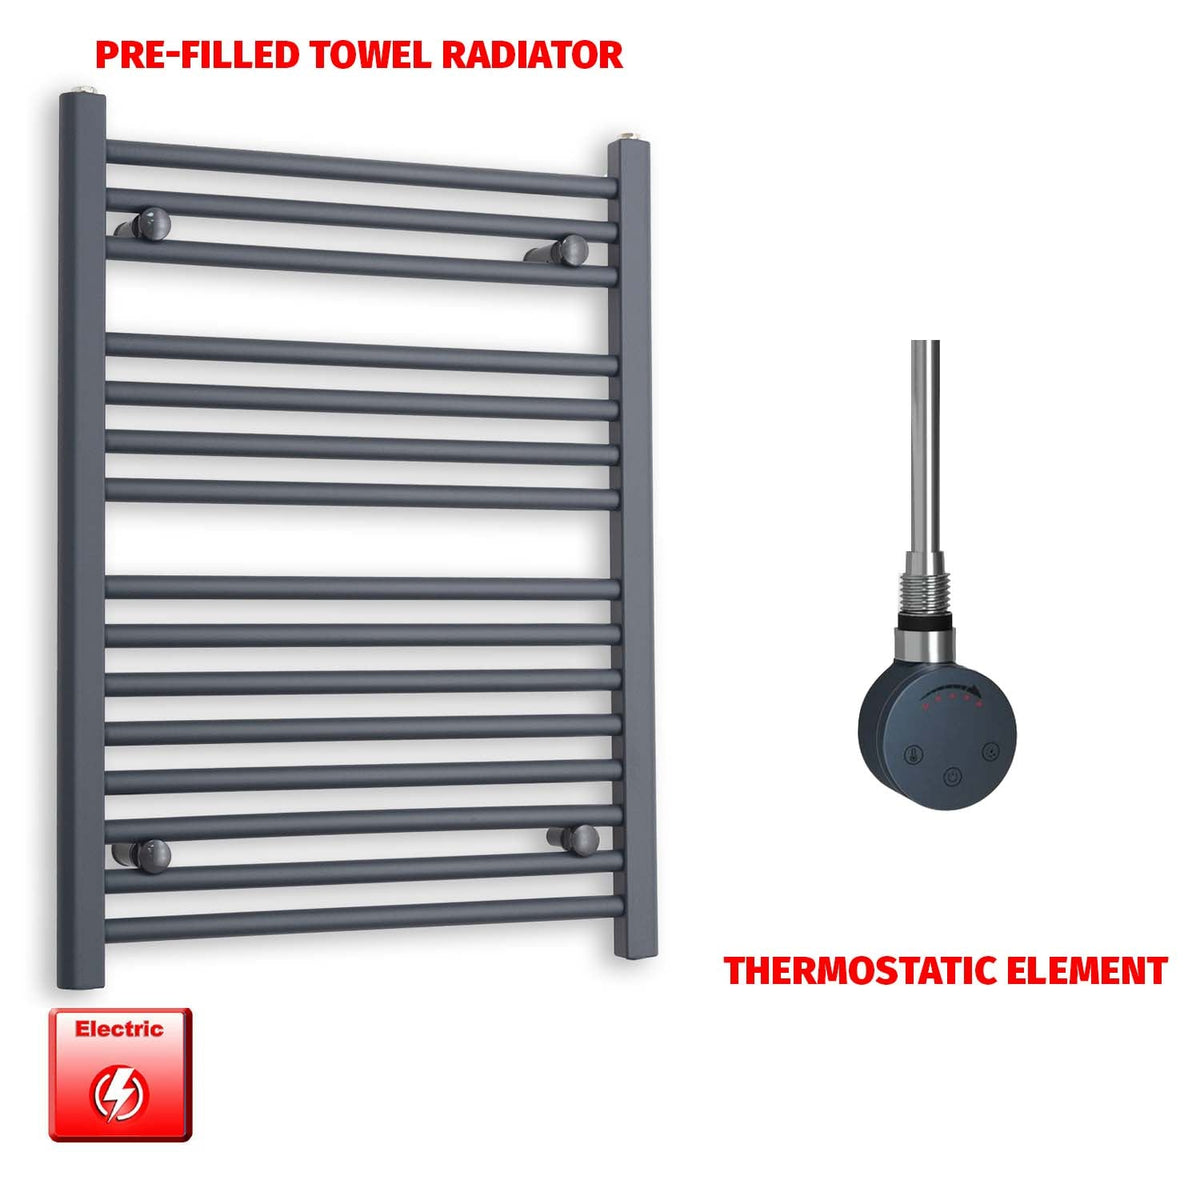 800mm High 600mm Wide Flat Anthracite Pre-Filled Electric Heated Towel Rail Radiator HTR SMR Thermostatic element no timer